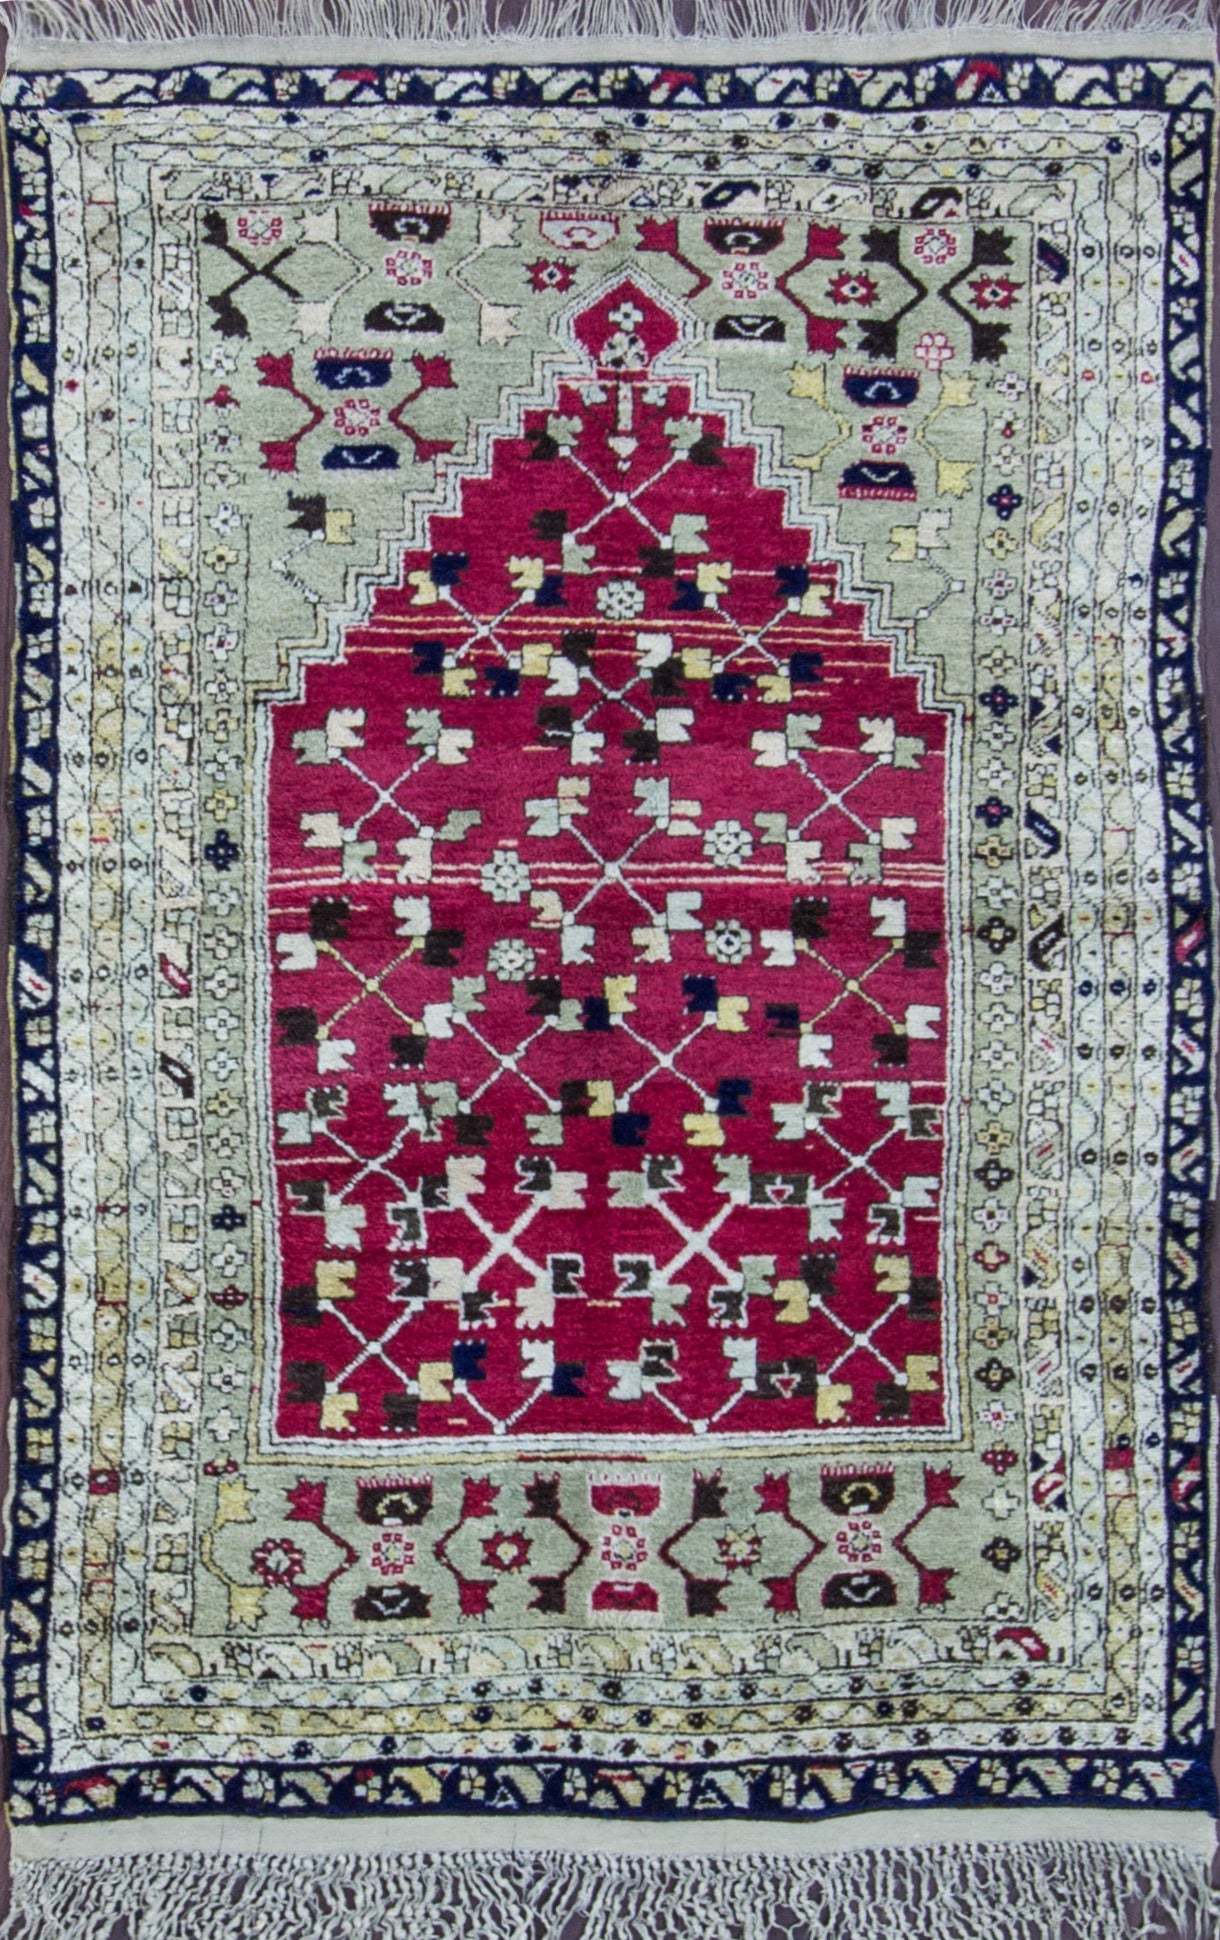 Konya prayer rug, Turkey, circa turn of the 19th century. Vegetable wool pile on wool foundation. A truly exceptional color, design, quality antique rug.